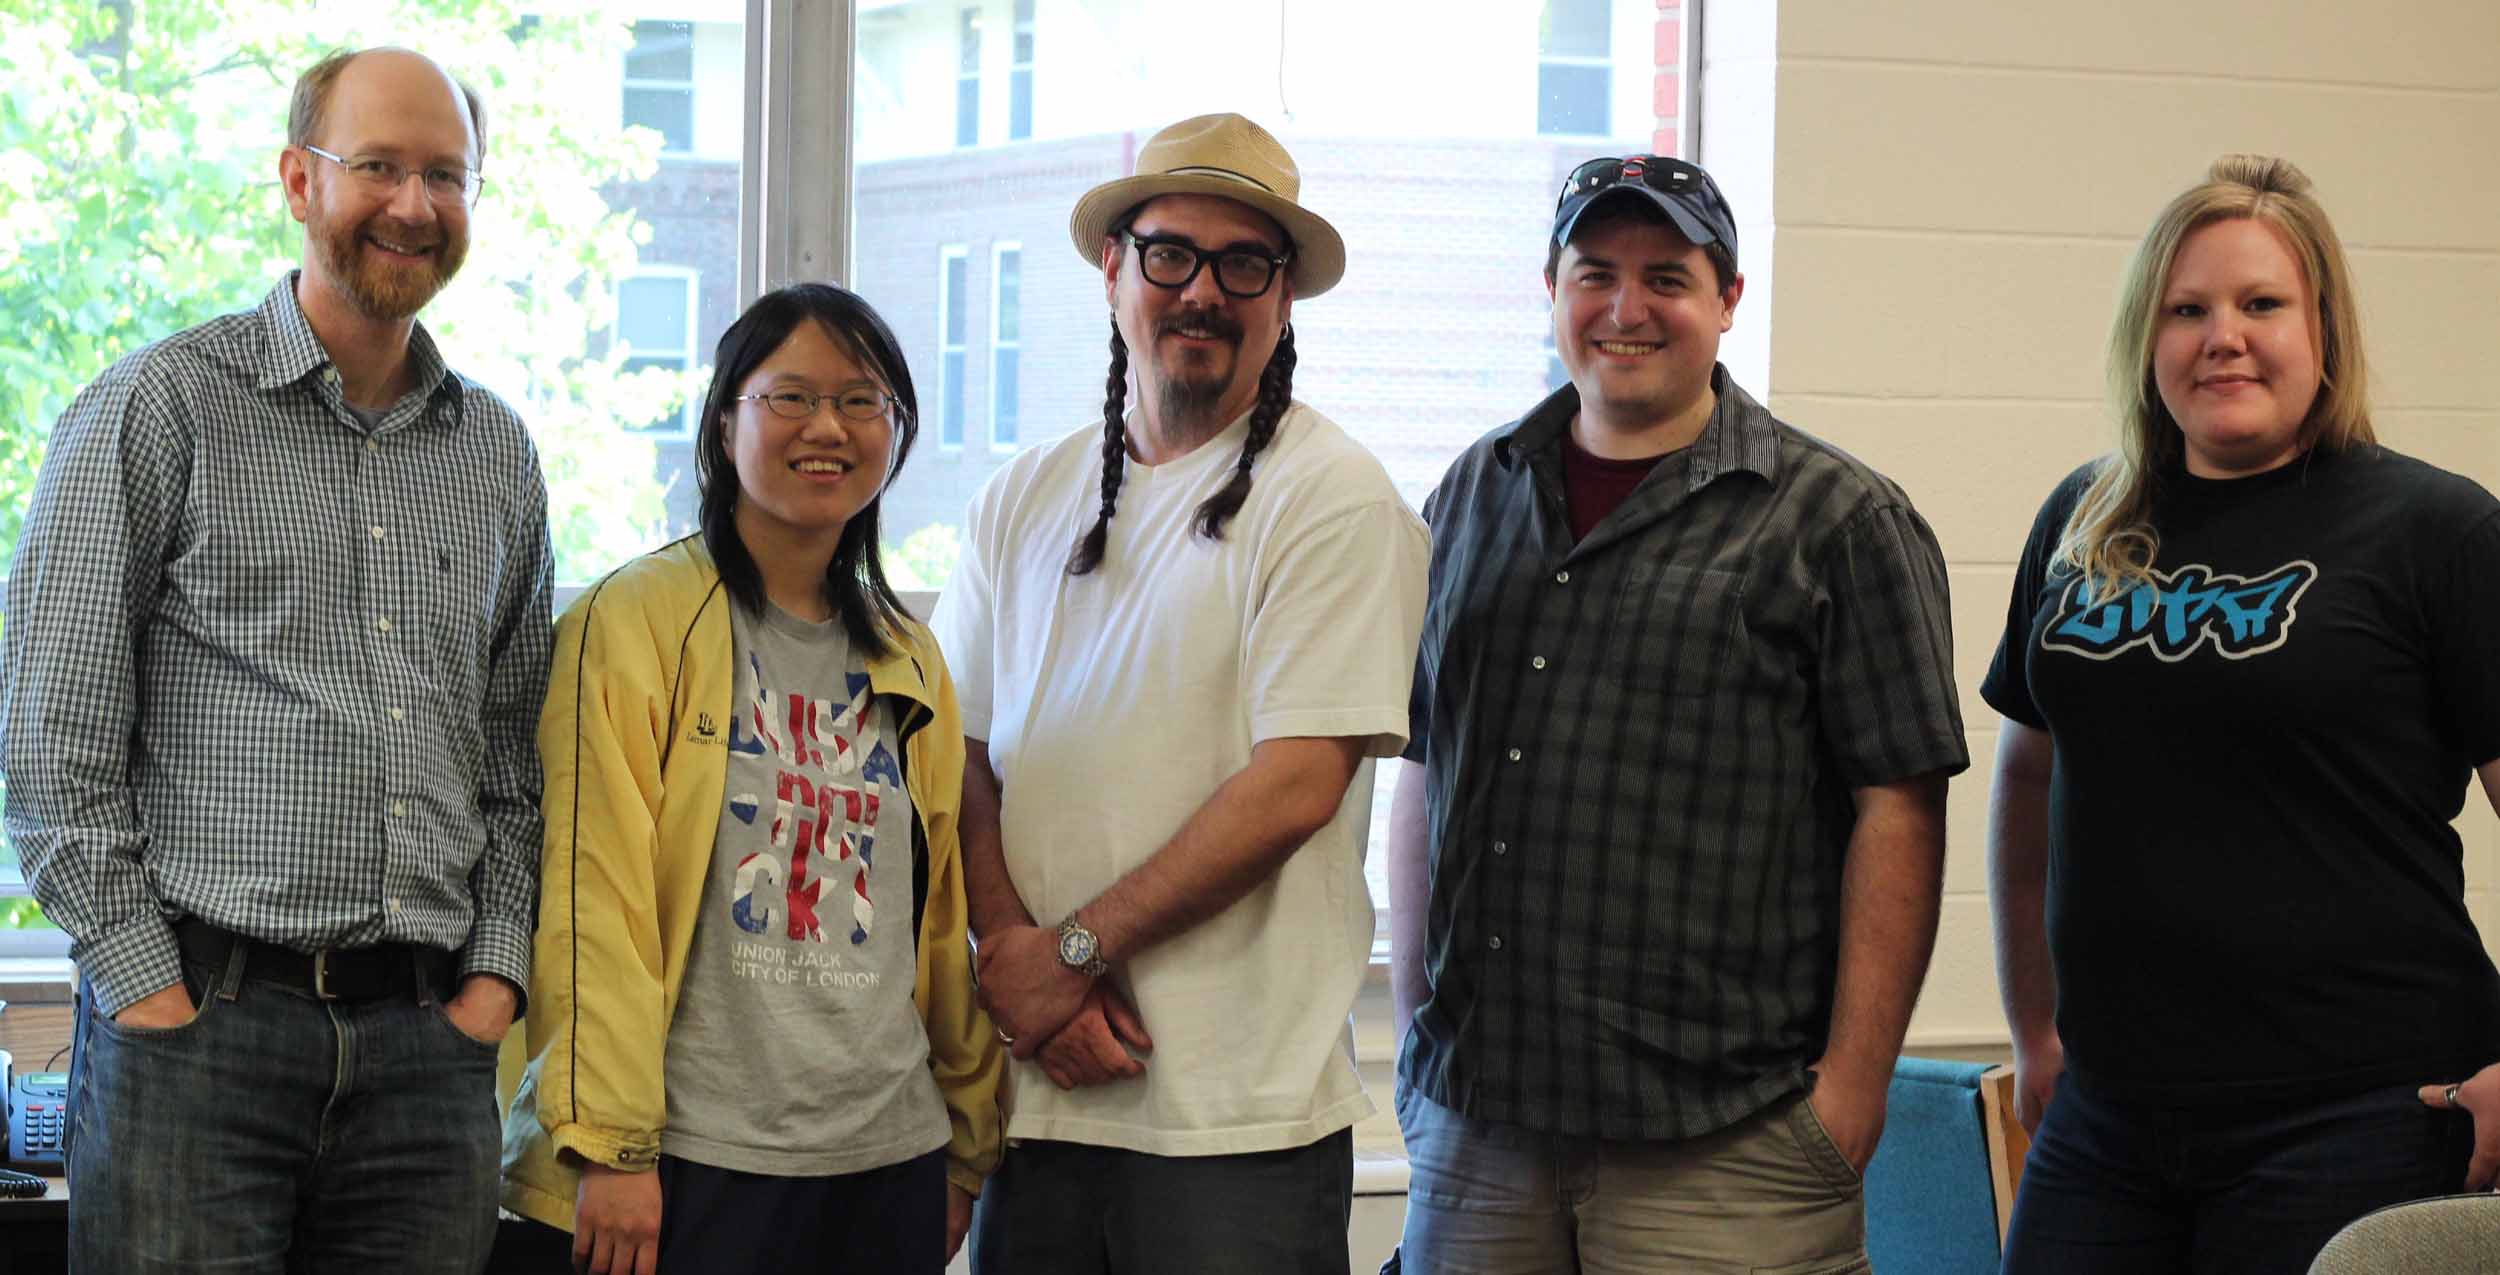 The Livingstone Online team at Indiana University of Pennsylvania: Adrian Wisnicki, Annie Lin, A.J. Schmitz, Adam Colton, and Eliza Albert, 2013. Copyright Livingstone Online. Creative Commons Attribution-NonCommercial 3.0 Unported (https://creativecommons.org/licenses/by-nc/3.0/).